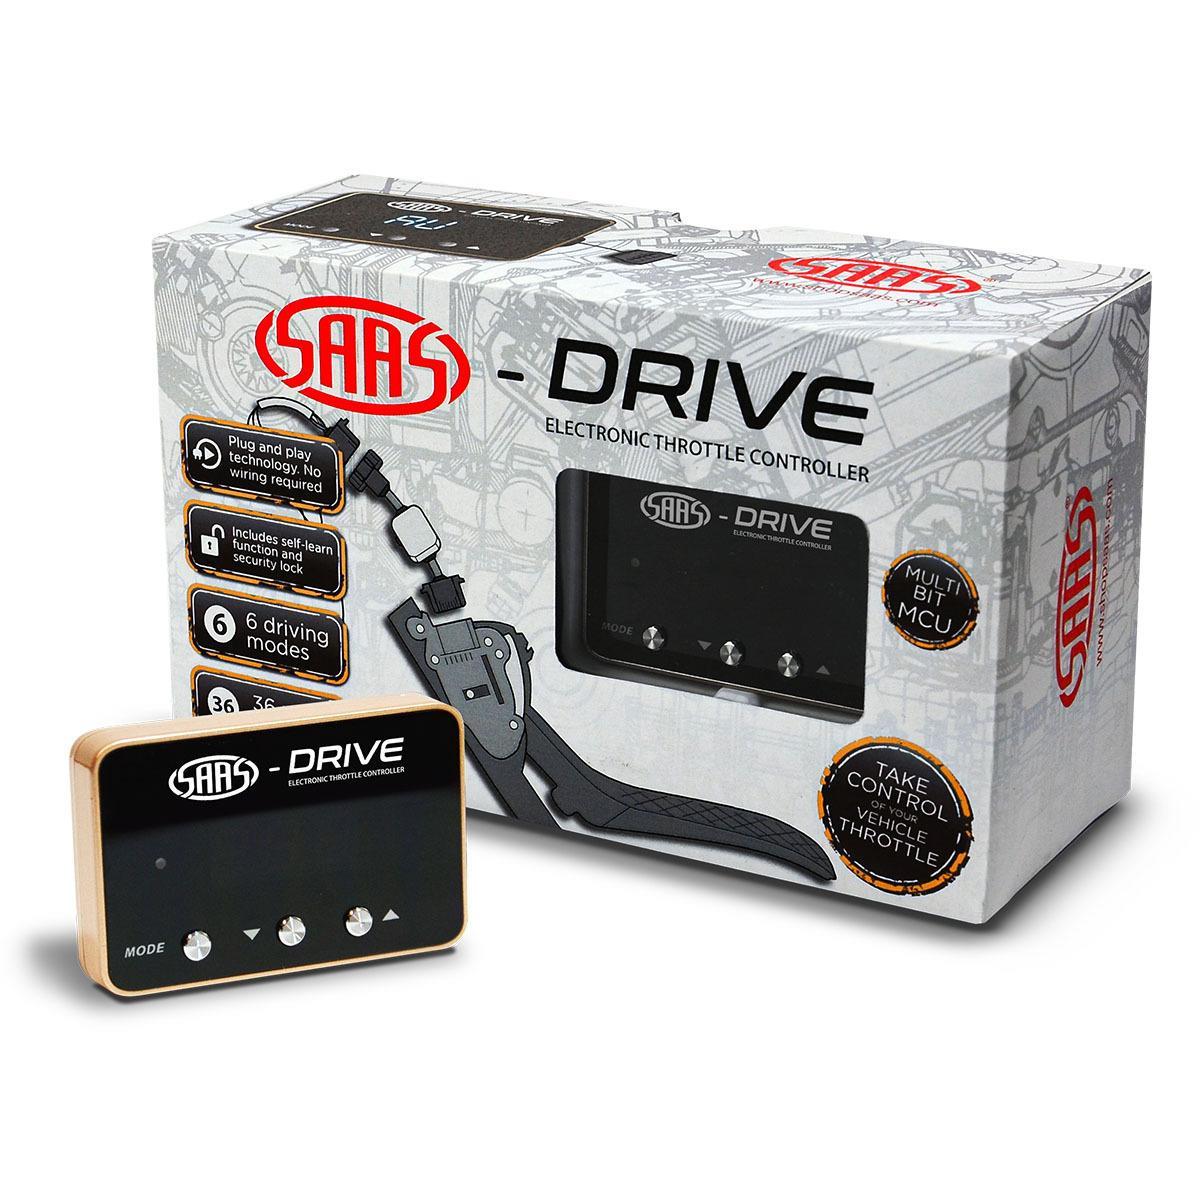 SAAS-Drive Throttle Controller For Audi R8 1st and 2nd Gen 2006 >